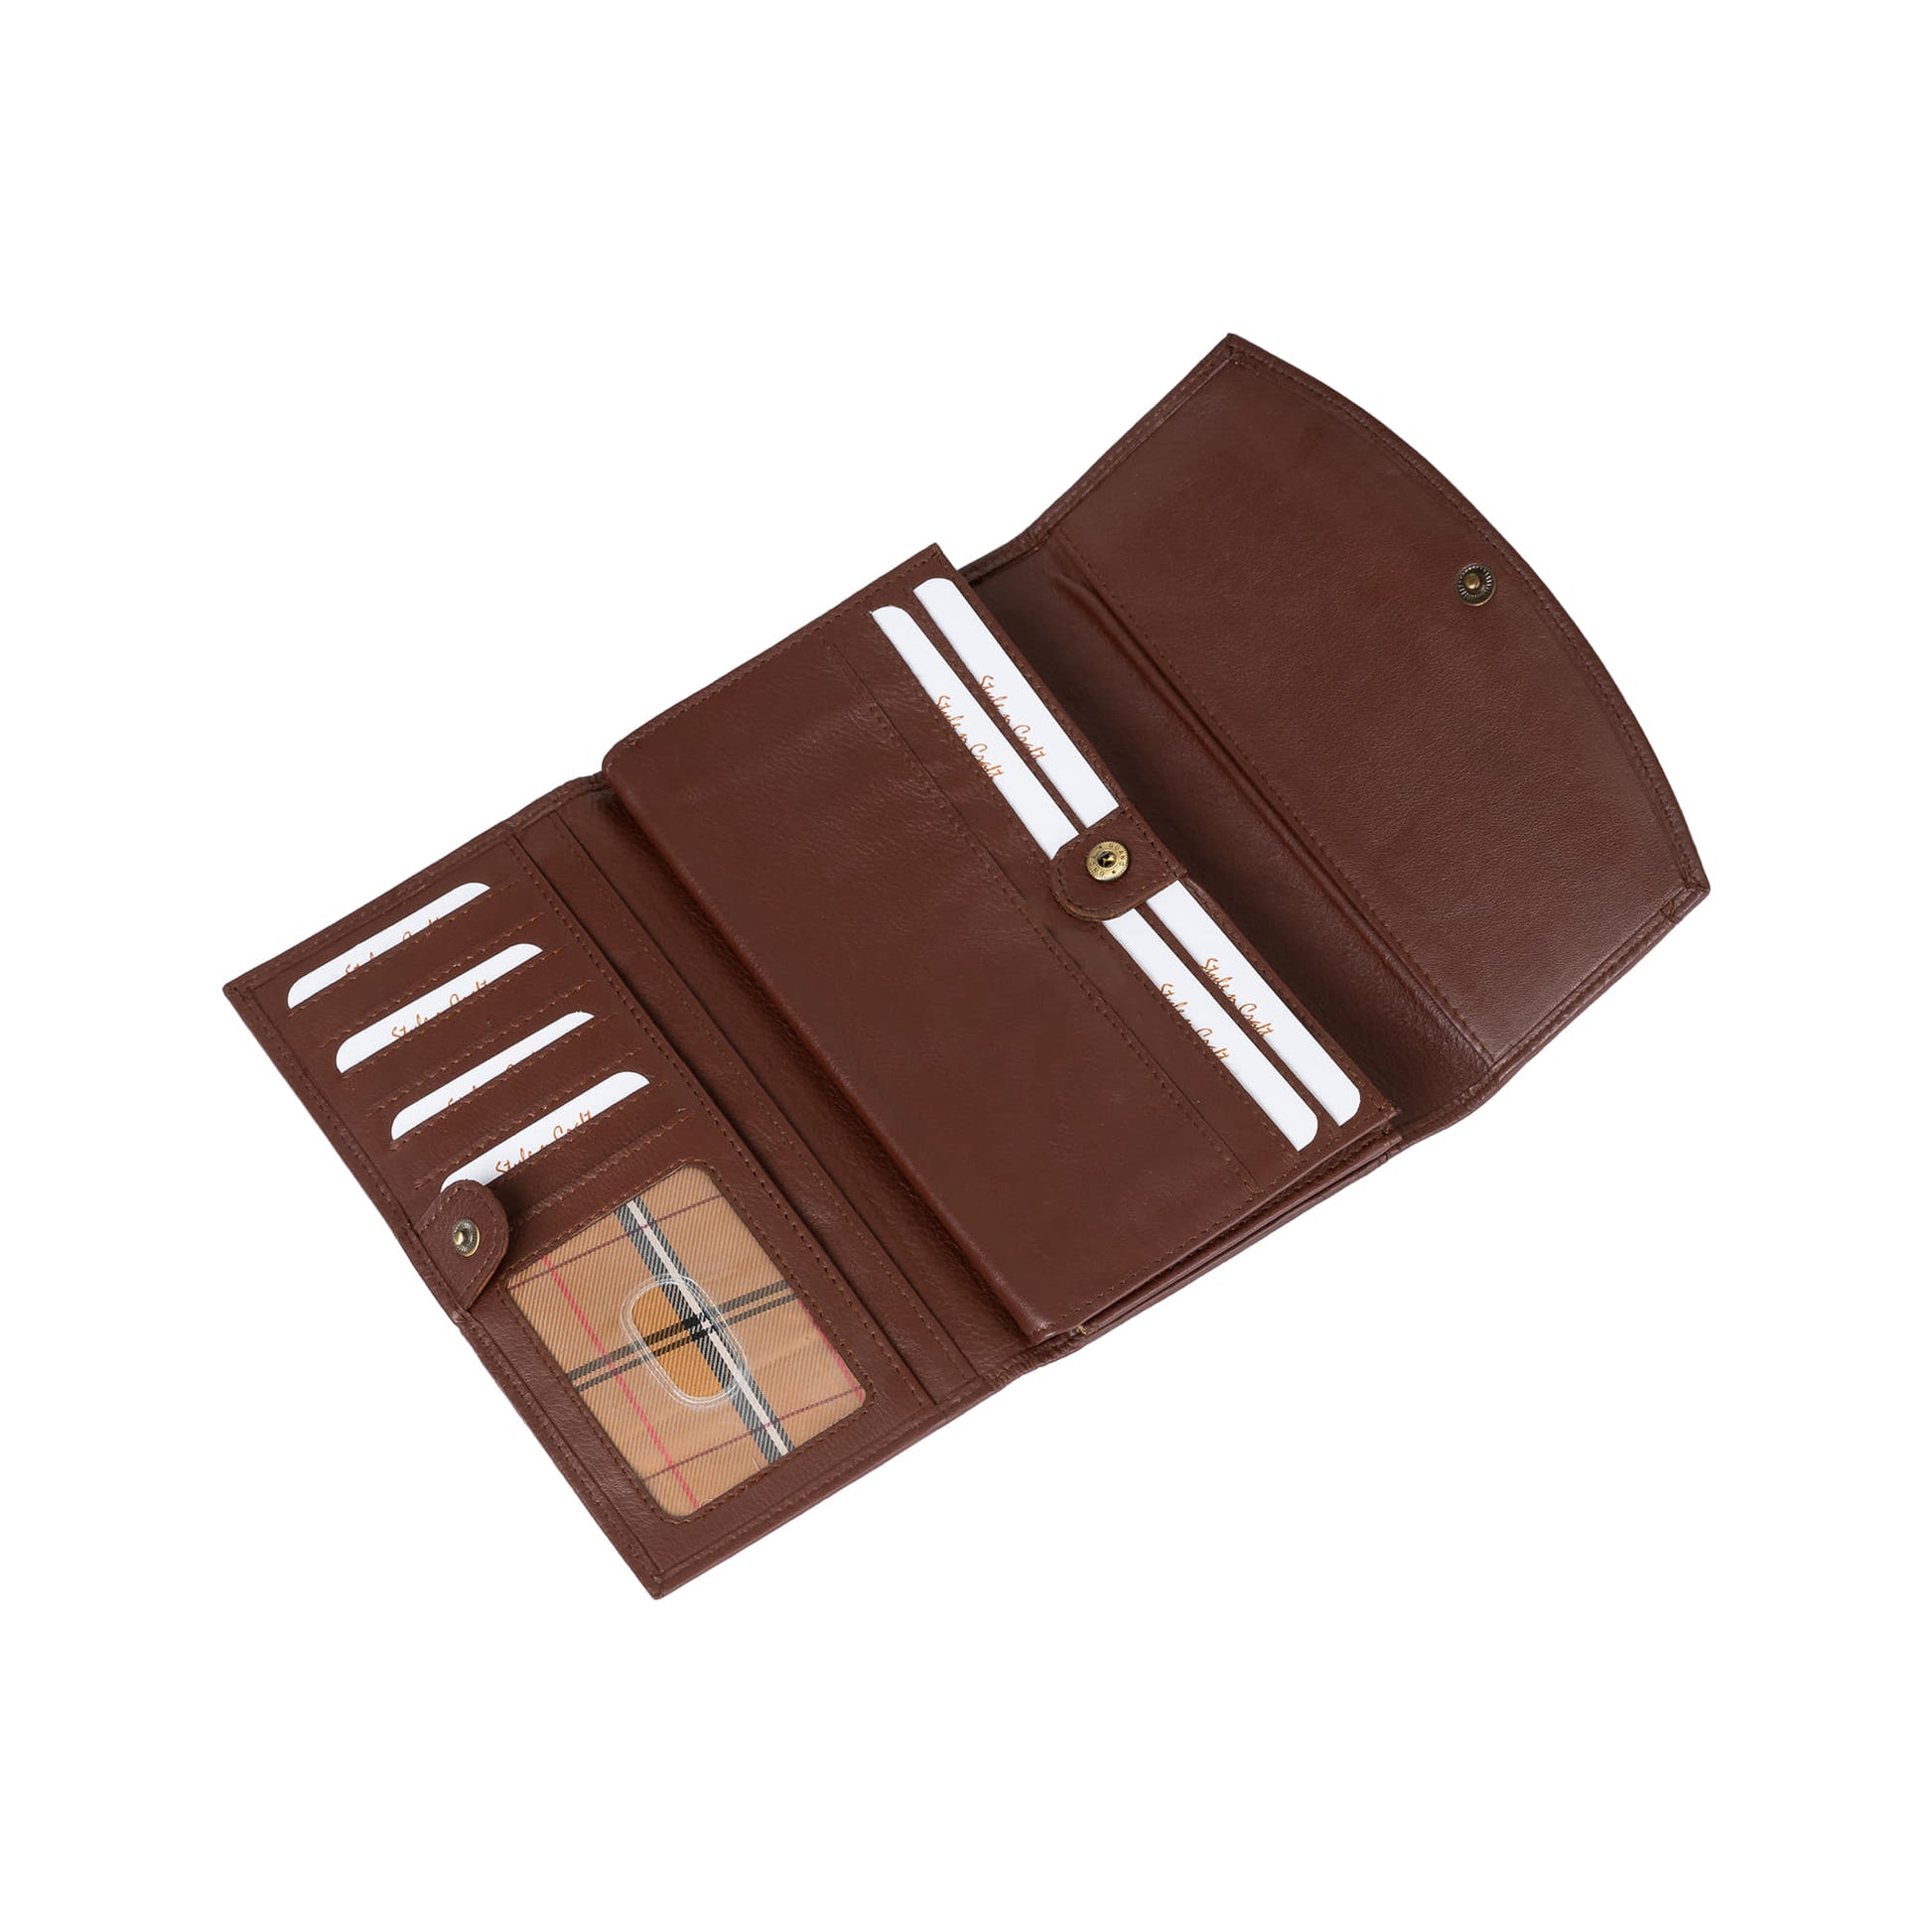 Style n Craft 391105 Double Fold Ladies Long Clutch Wallet in High Grade Brown Full Grain Leather - 2nd Open View Showing the Credit Card Pockets, ID Window, Inside Long Pockets